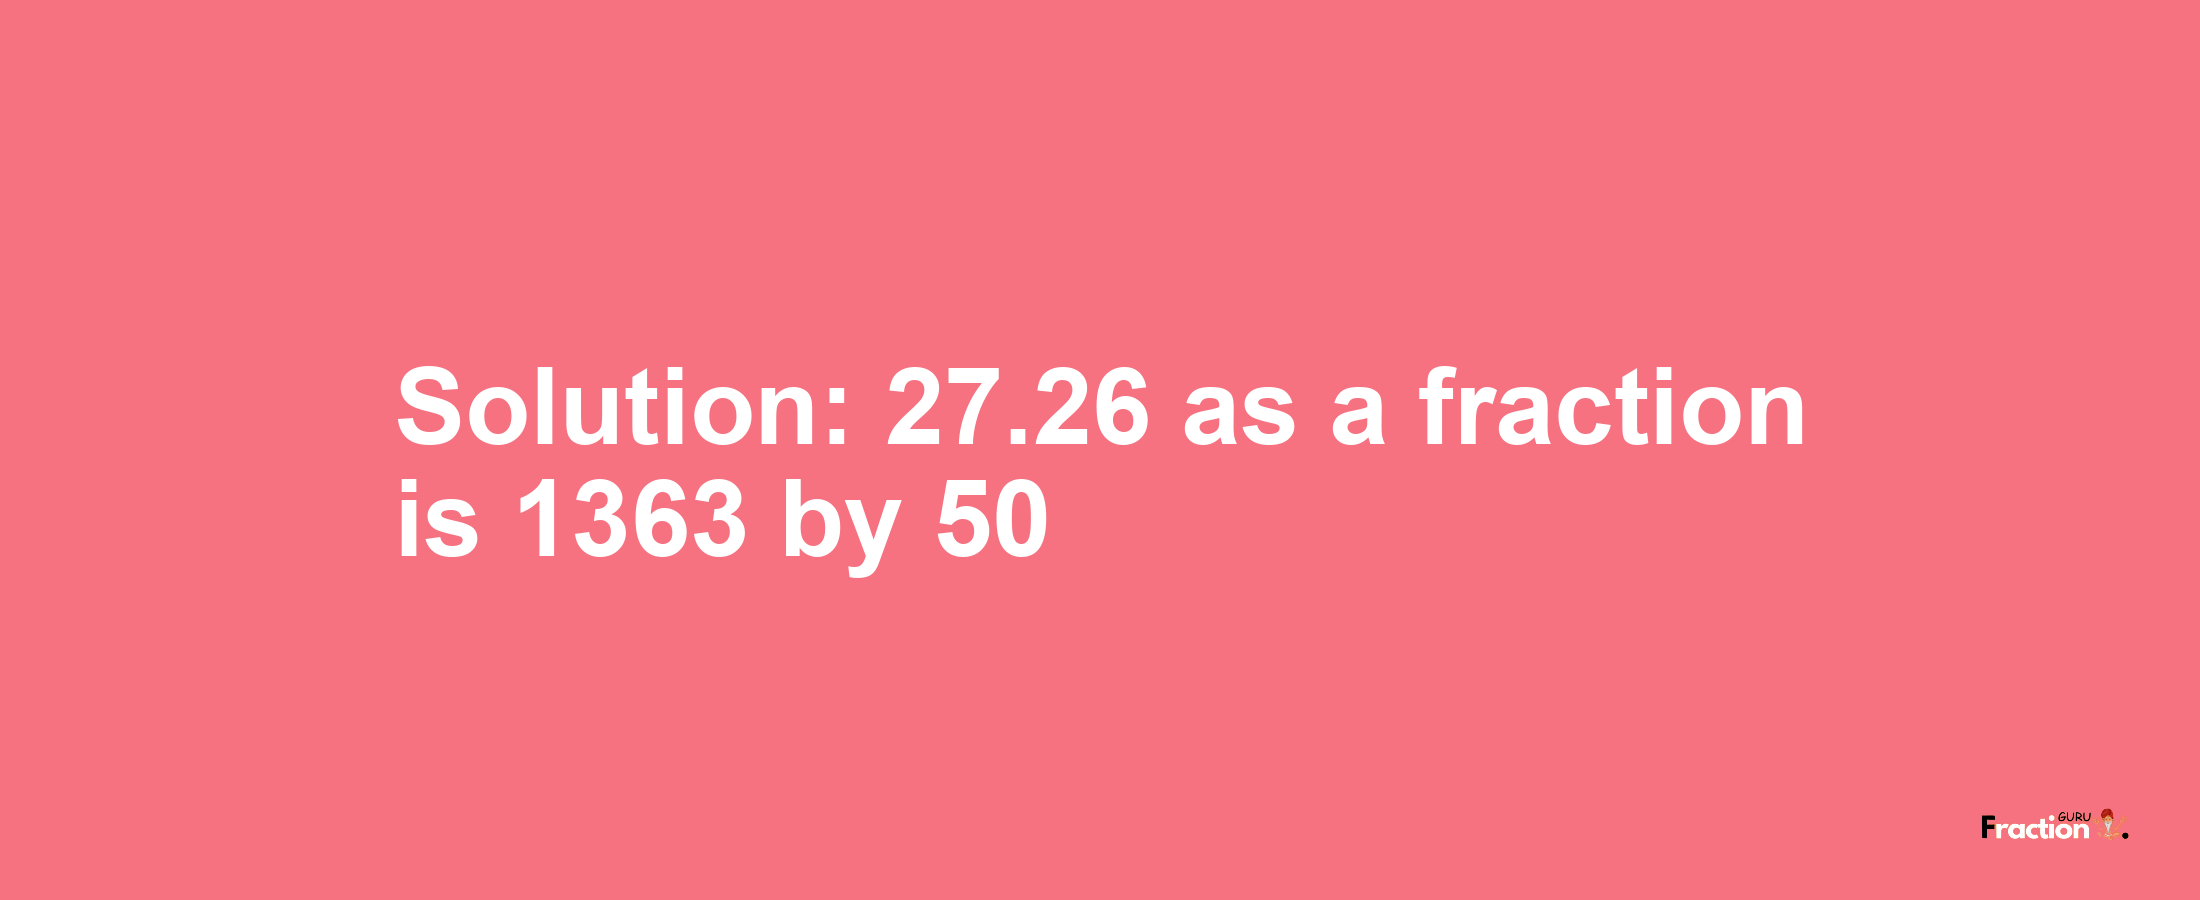 Solution:27.26 as a fraction is 1363/50